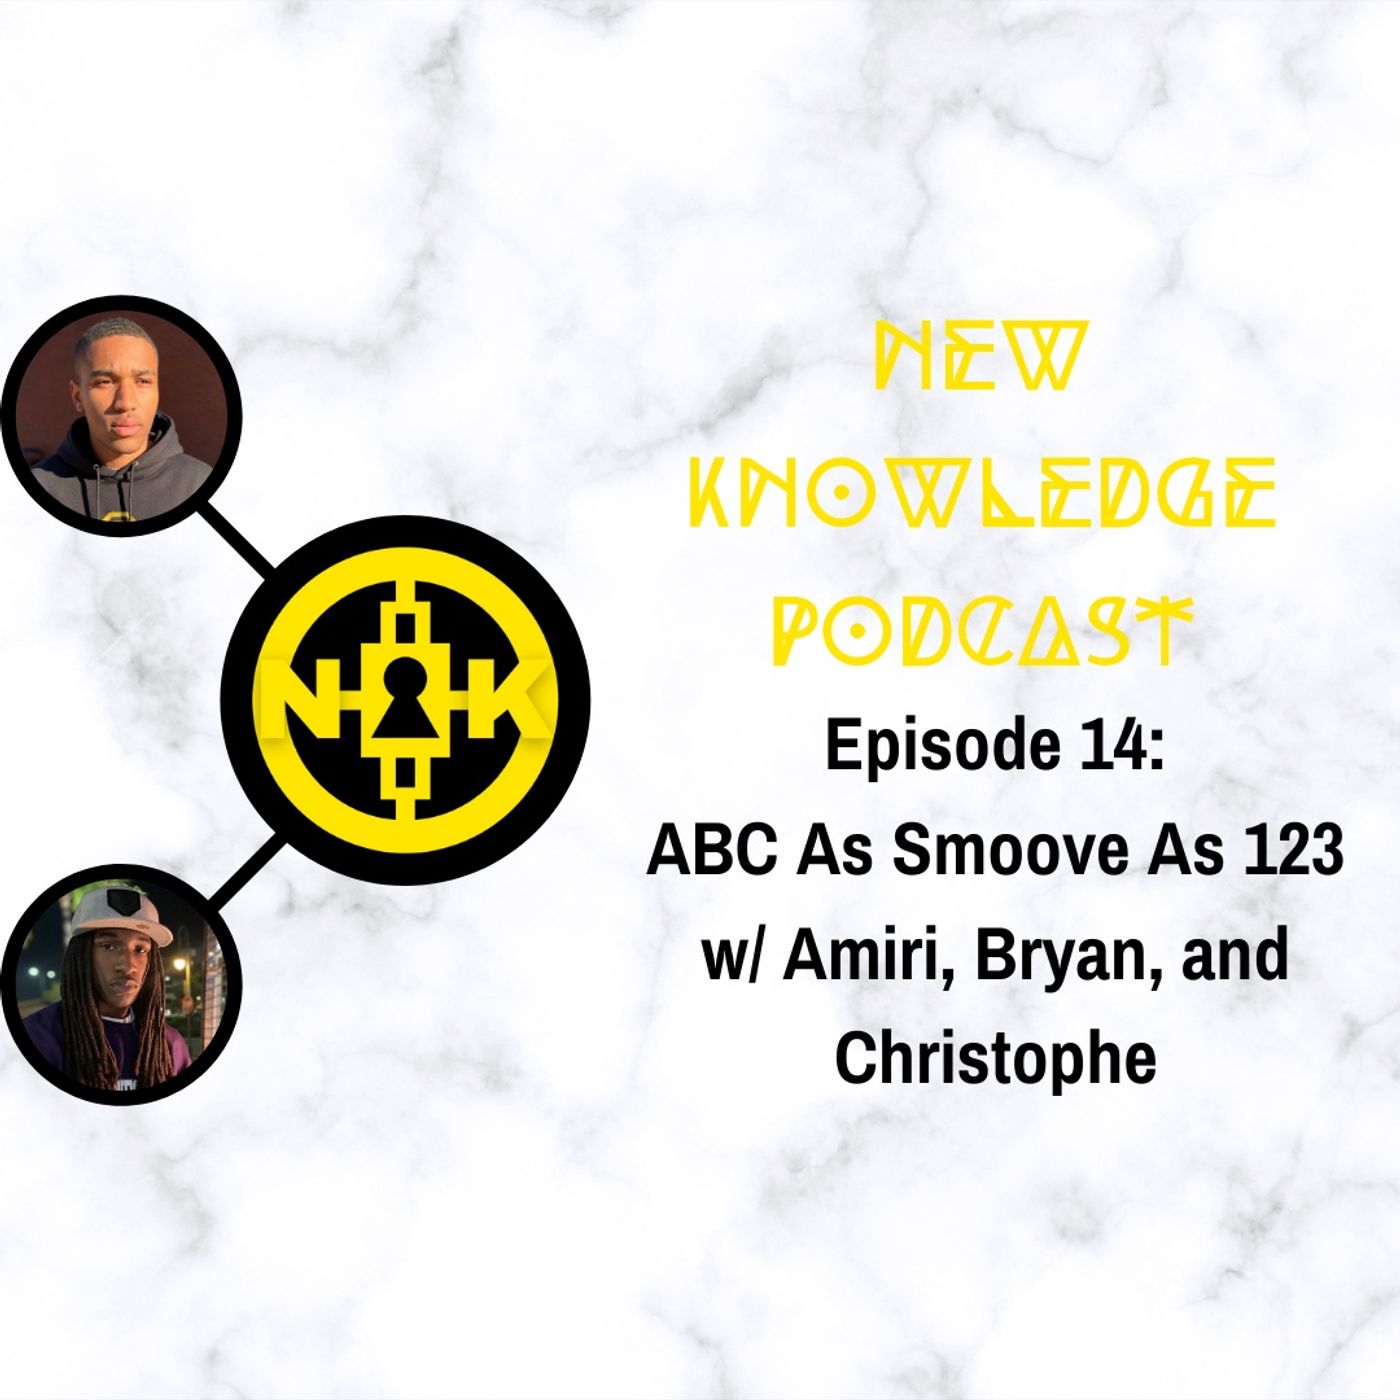 Episode 14: ABC As Smoove As 123 w/ Amiri, Bryan, and Christophe